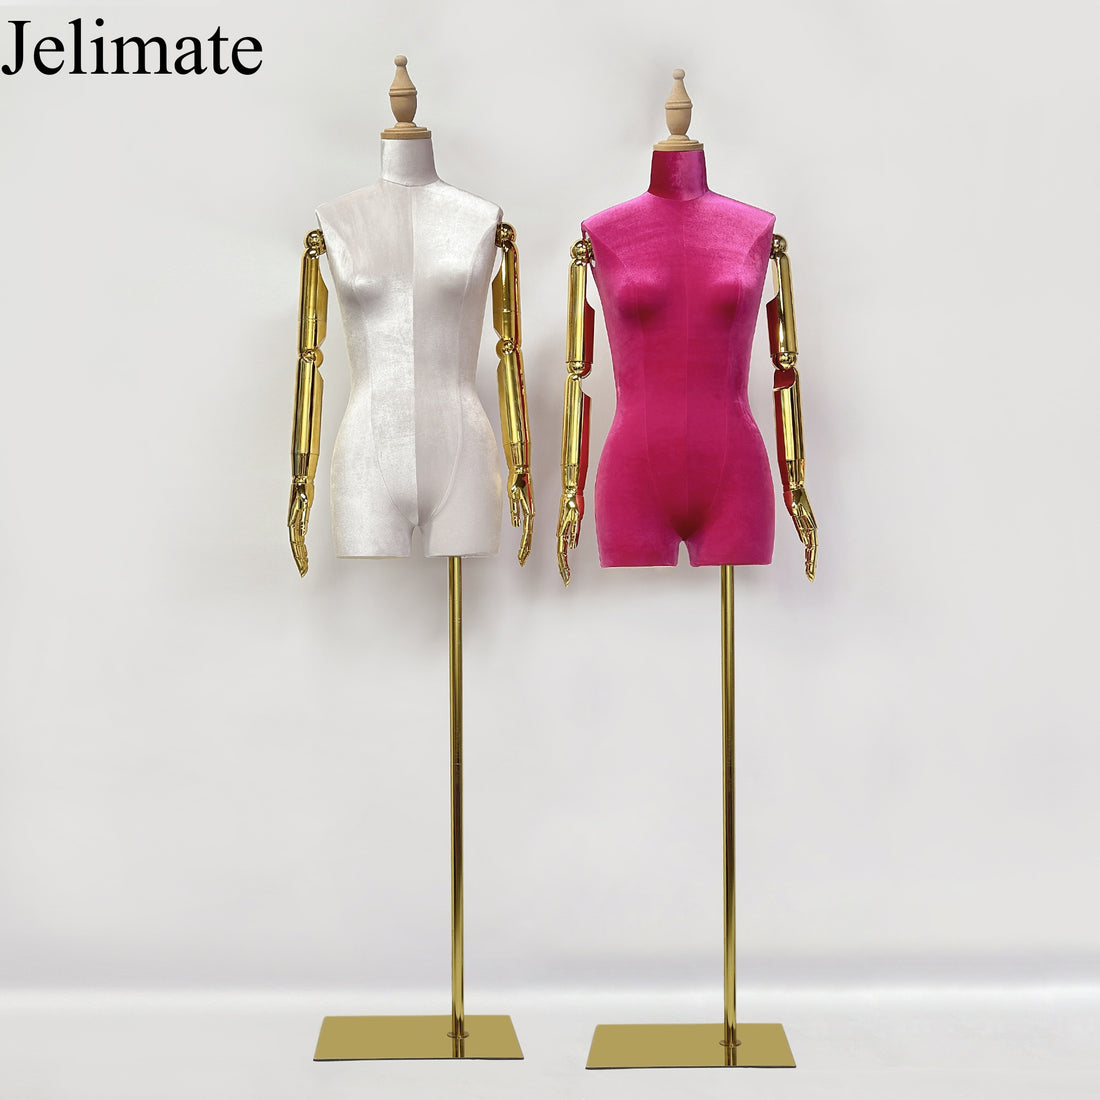 How To Creating Eye-Catching Window Display with Jelimate Half Body Headless Female Velvet Mannequin Torso Make Different Poses In Clothing Boutique Stores?